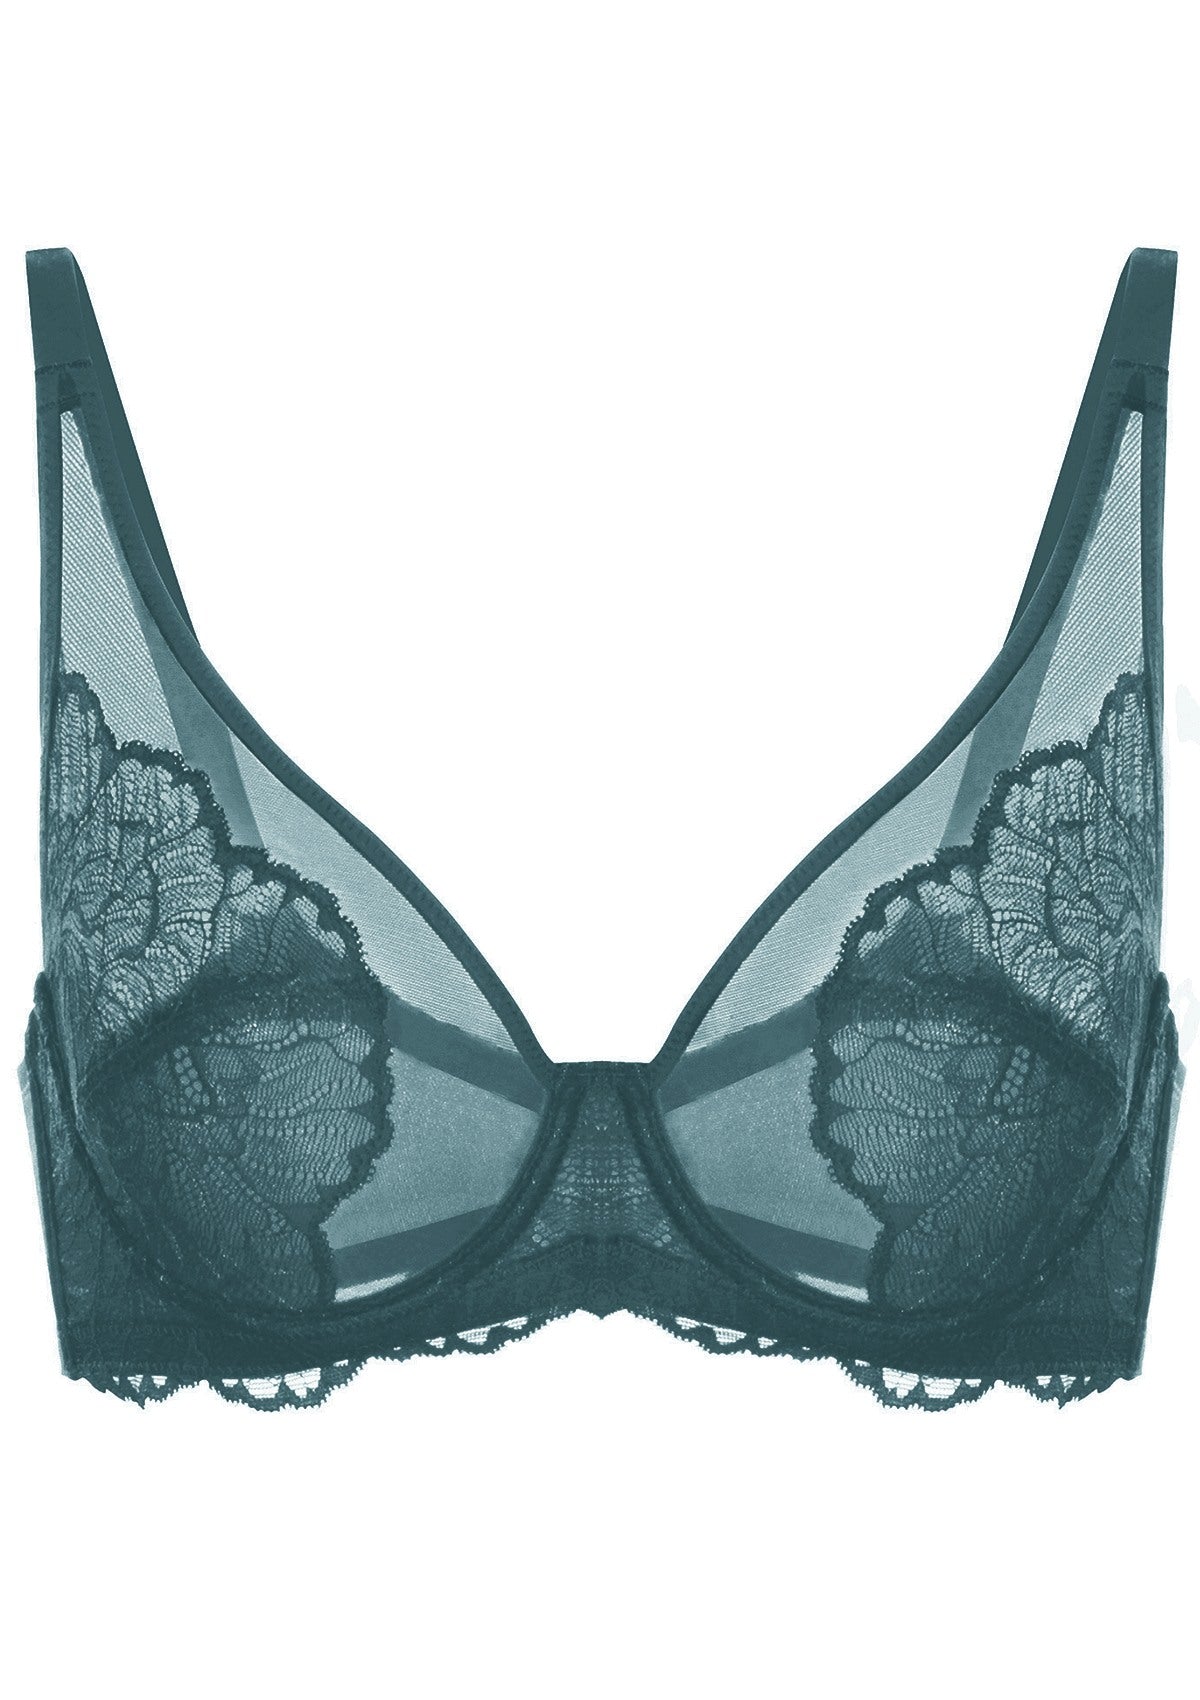 HSIA Blossom Full Figure See-Through Lace Bra For Side And Back Fat - Biscay Blue / 42 / D